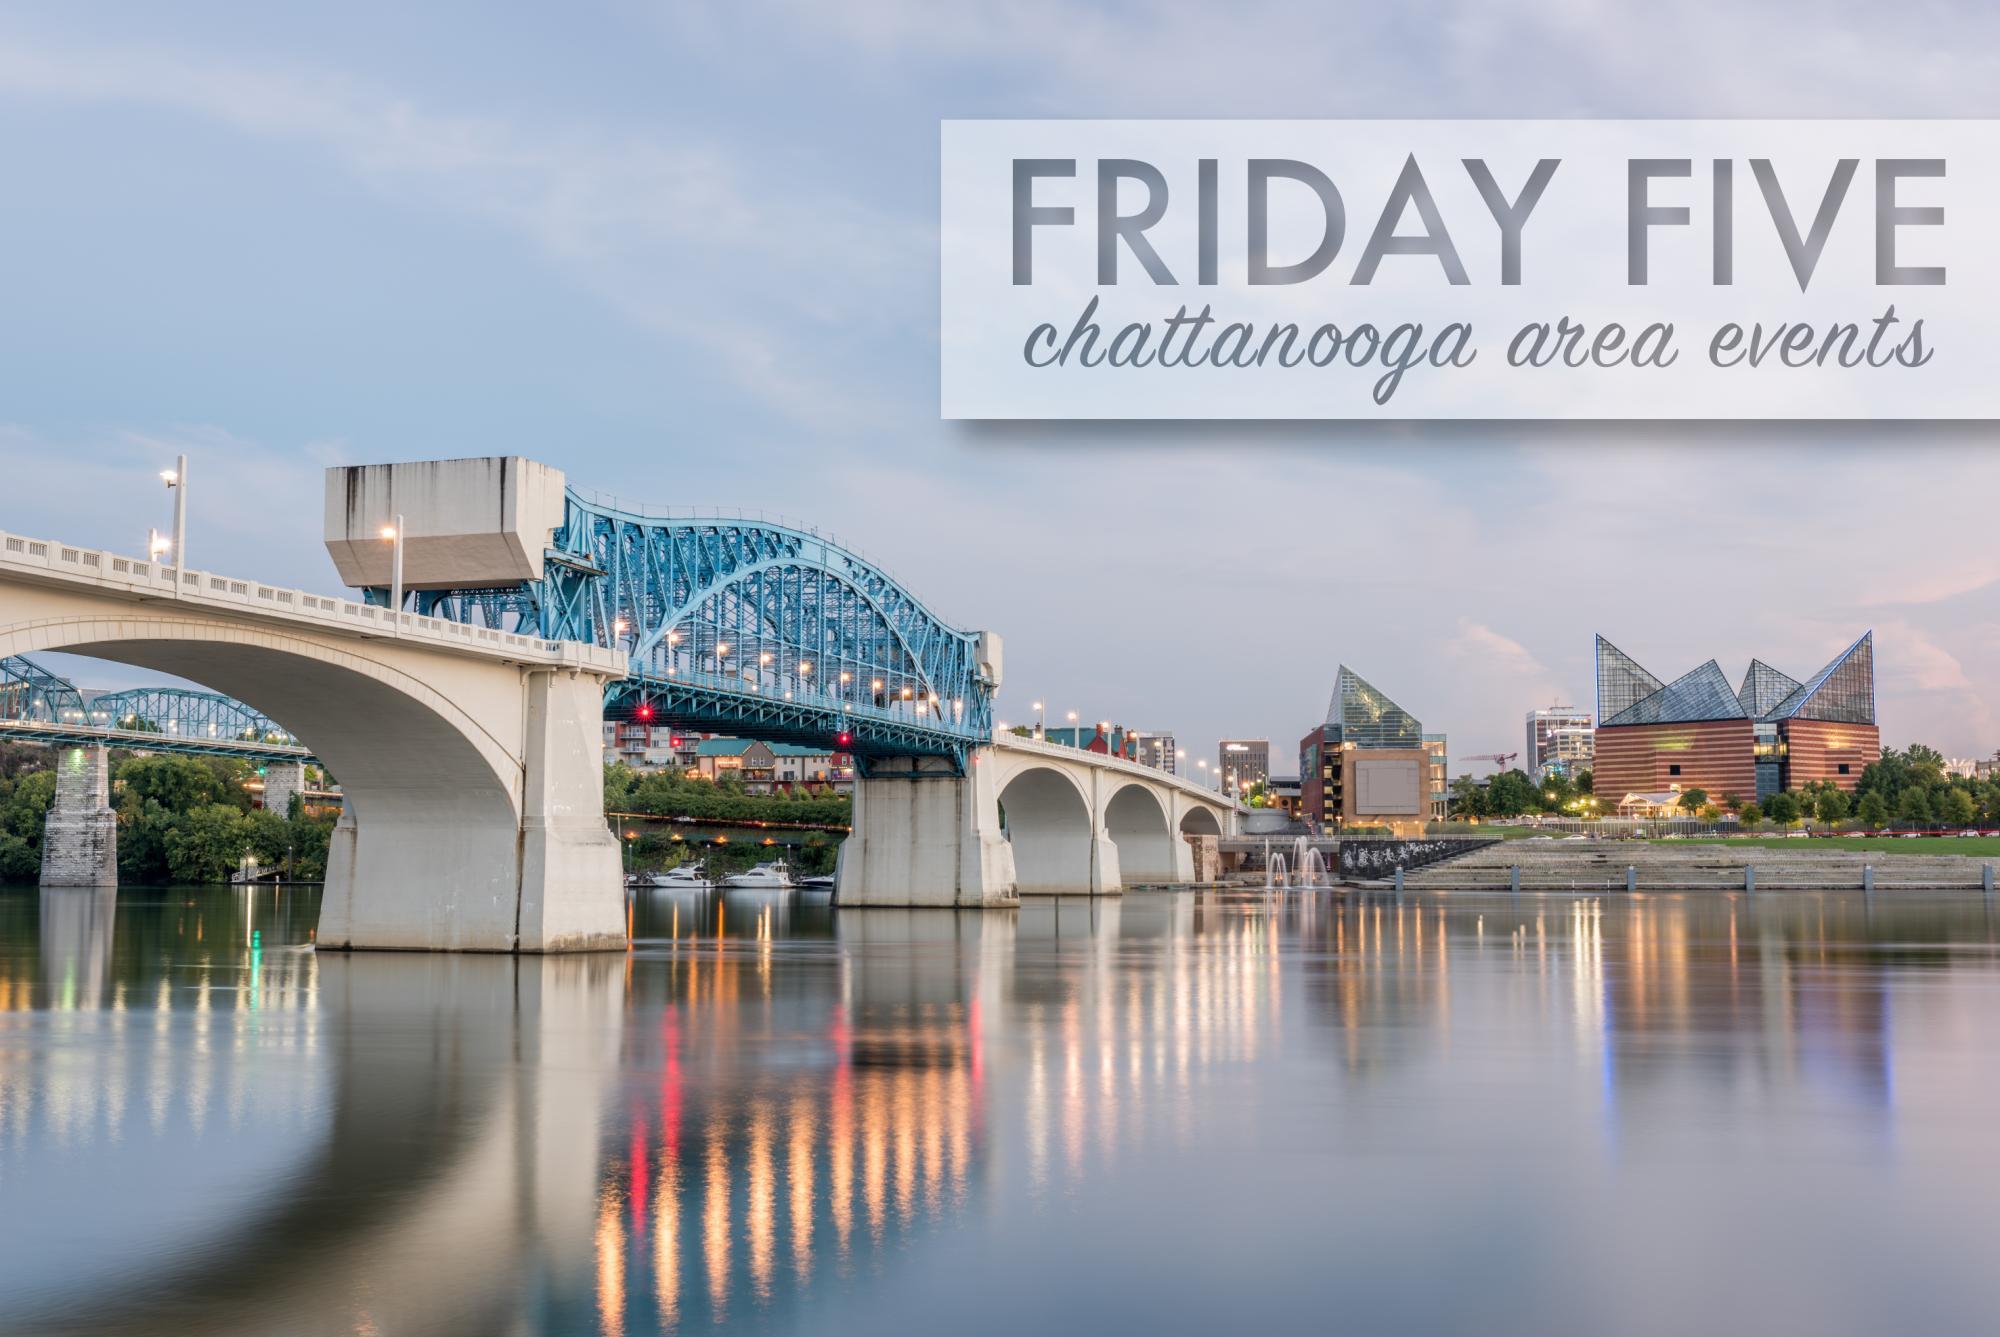 Chattanooga area events